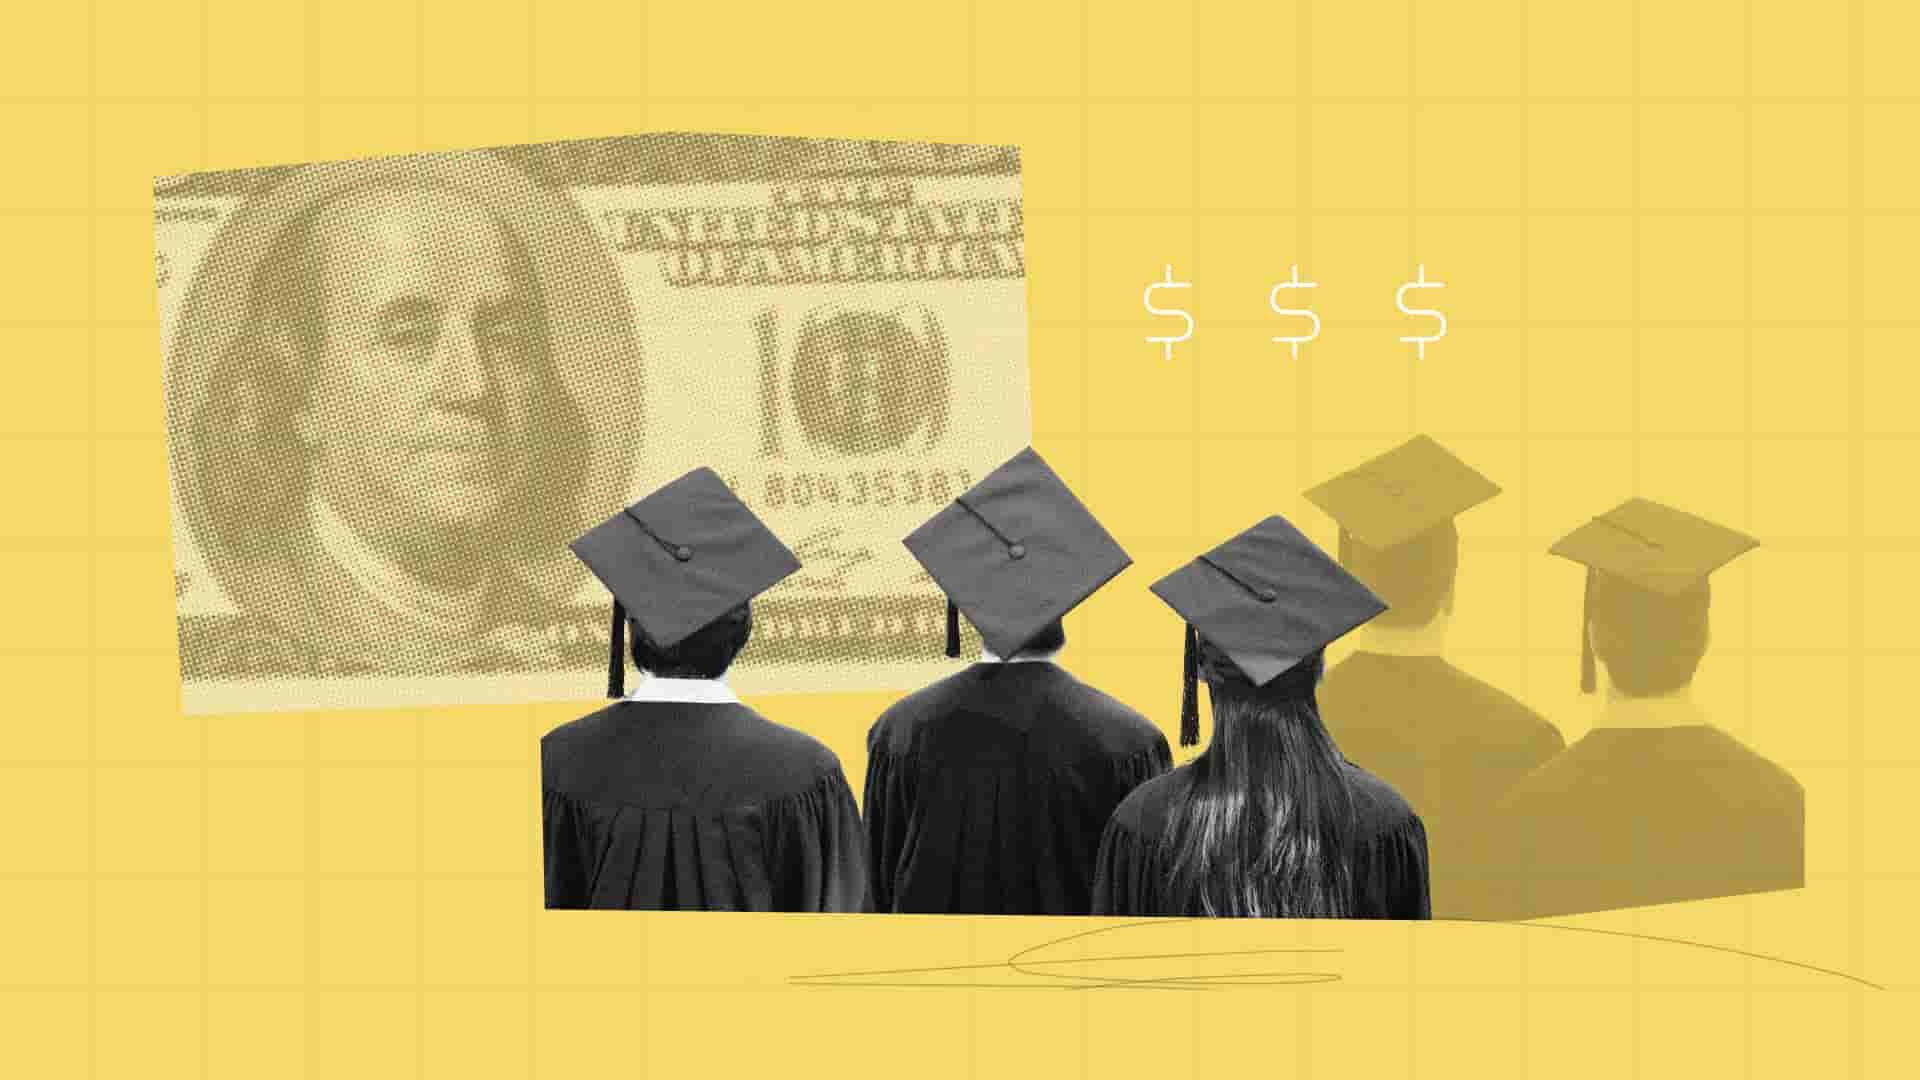 Nearly 3 in 5 Student Loan Borrowers Say They Won’t Be Able to Afford Their Payments Come January